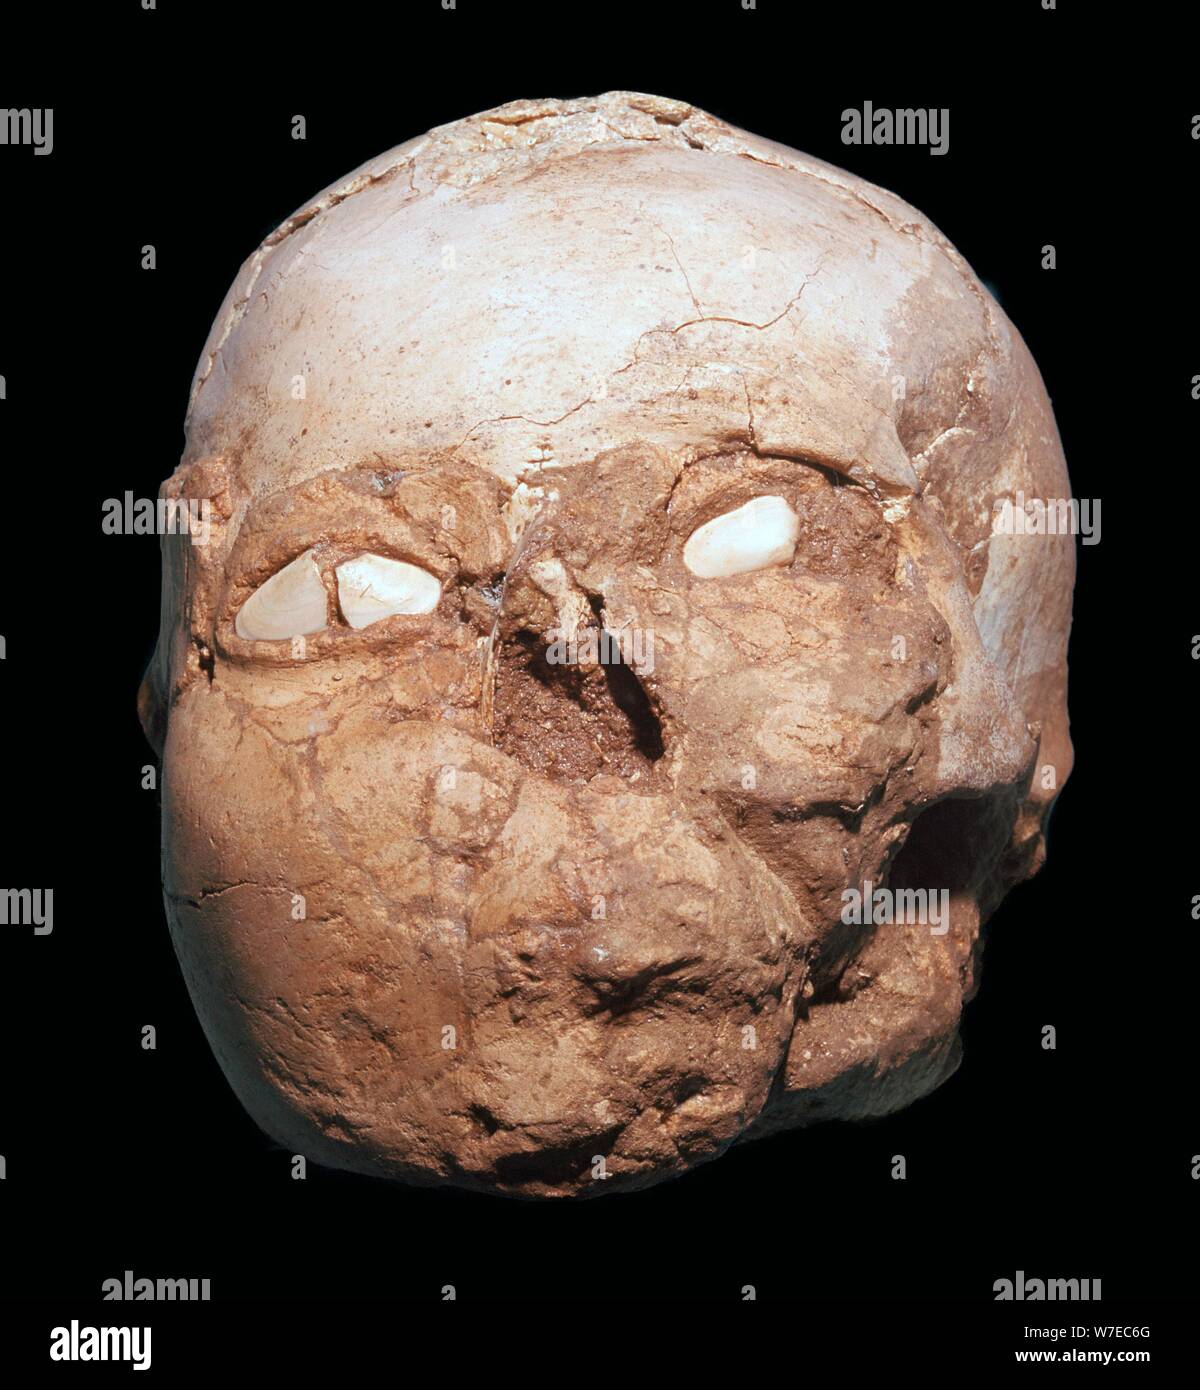 Skull from Jericho, modelled with plaster and shells. Artist: Unknown Stock Photo